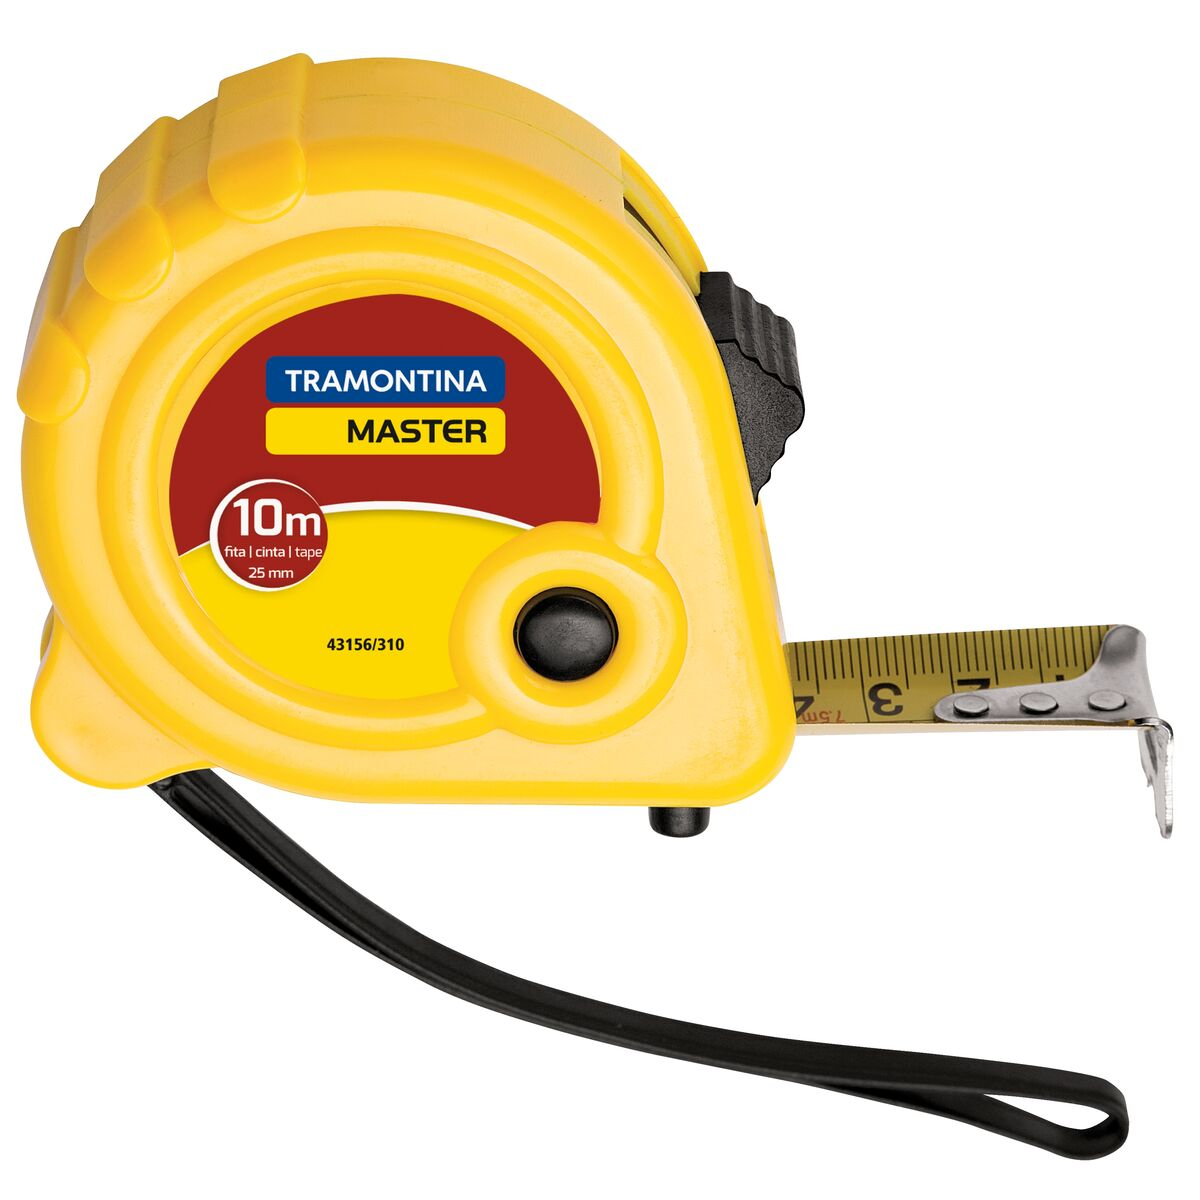 Tramontina MASTER 10 m Measuring tape with lock system